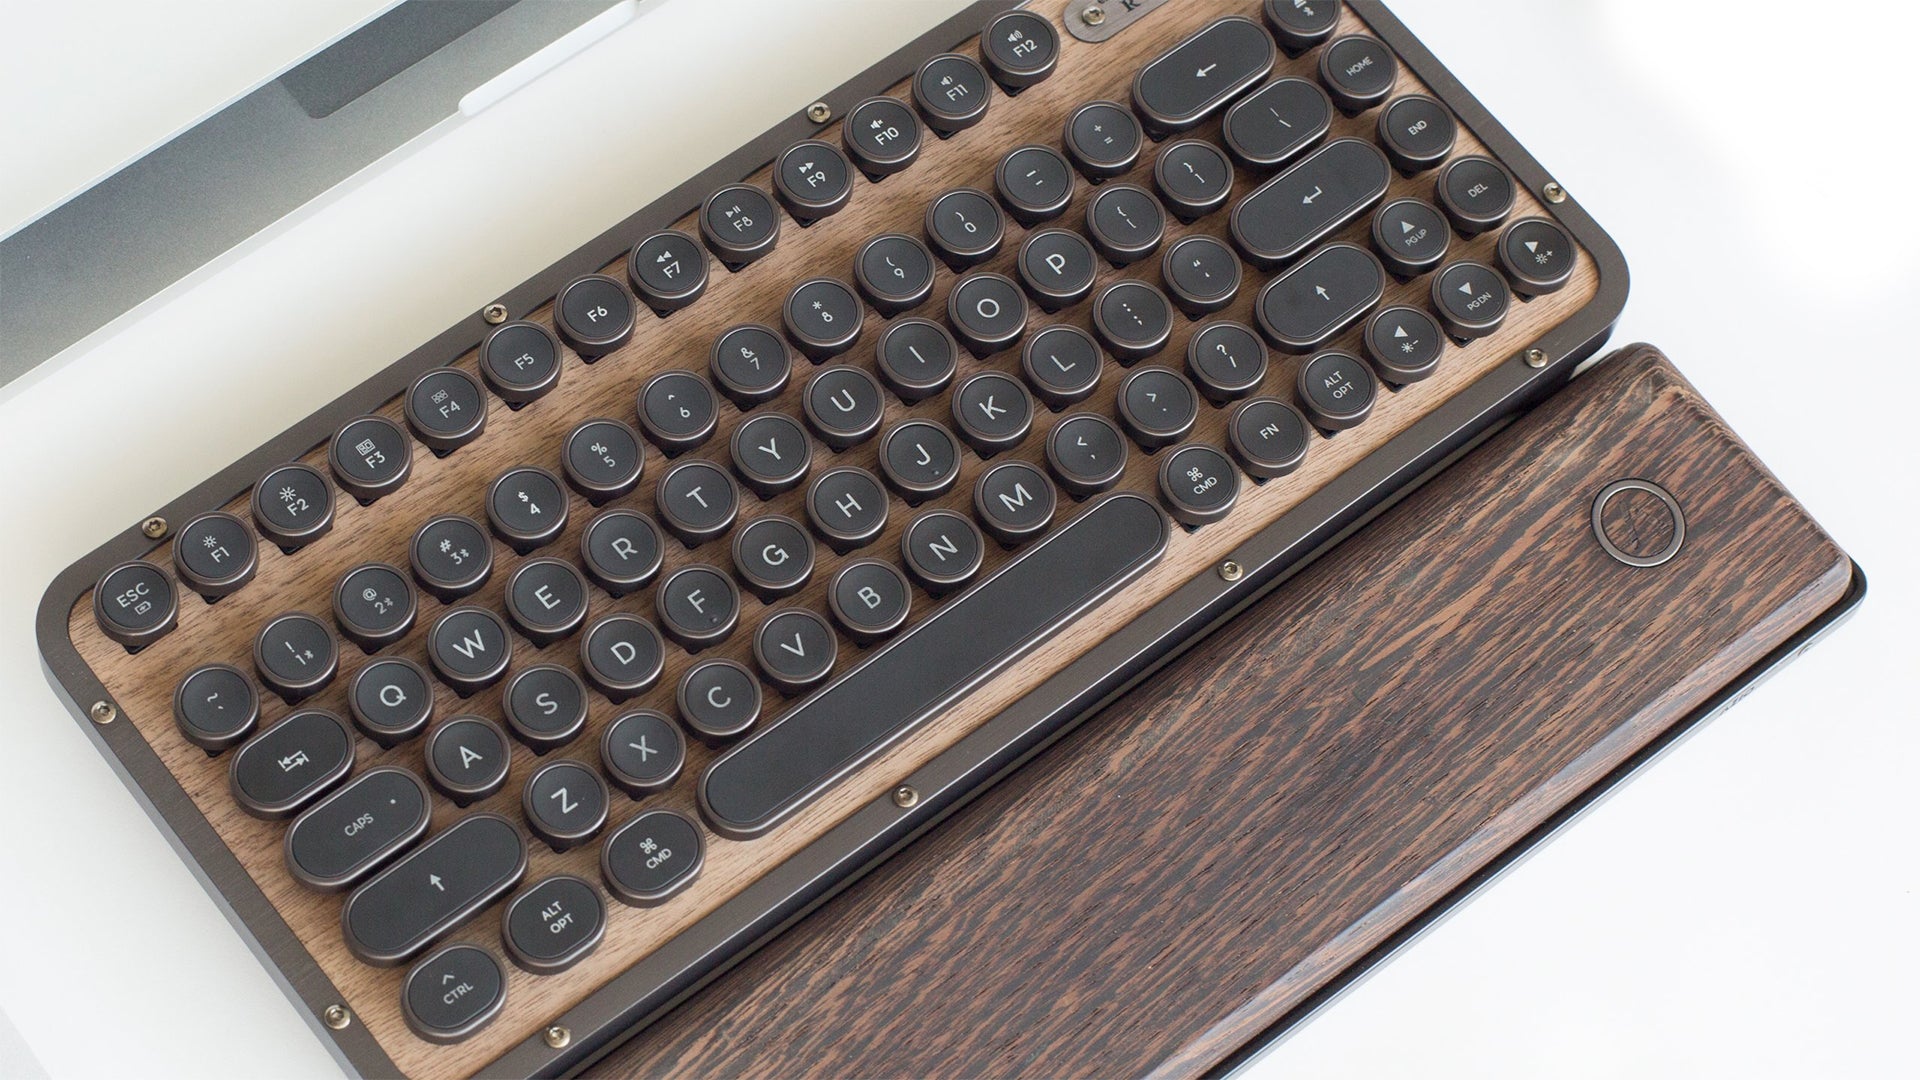 KOTAKU: They Made a Retro Compact Keyboard Out of Wood